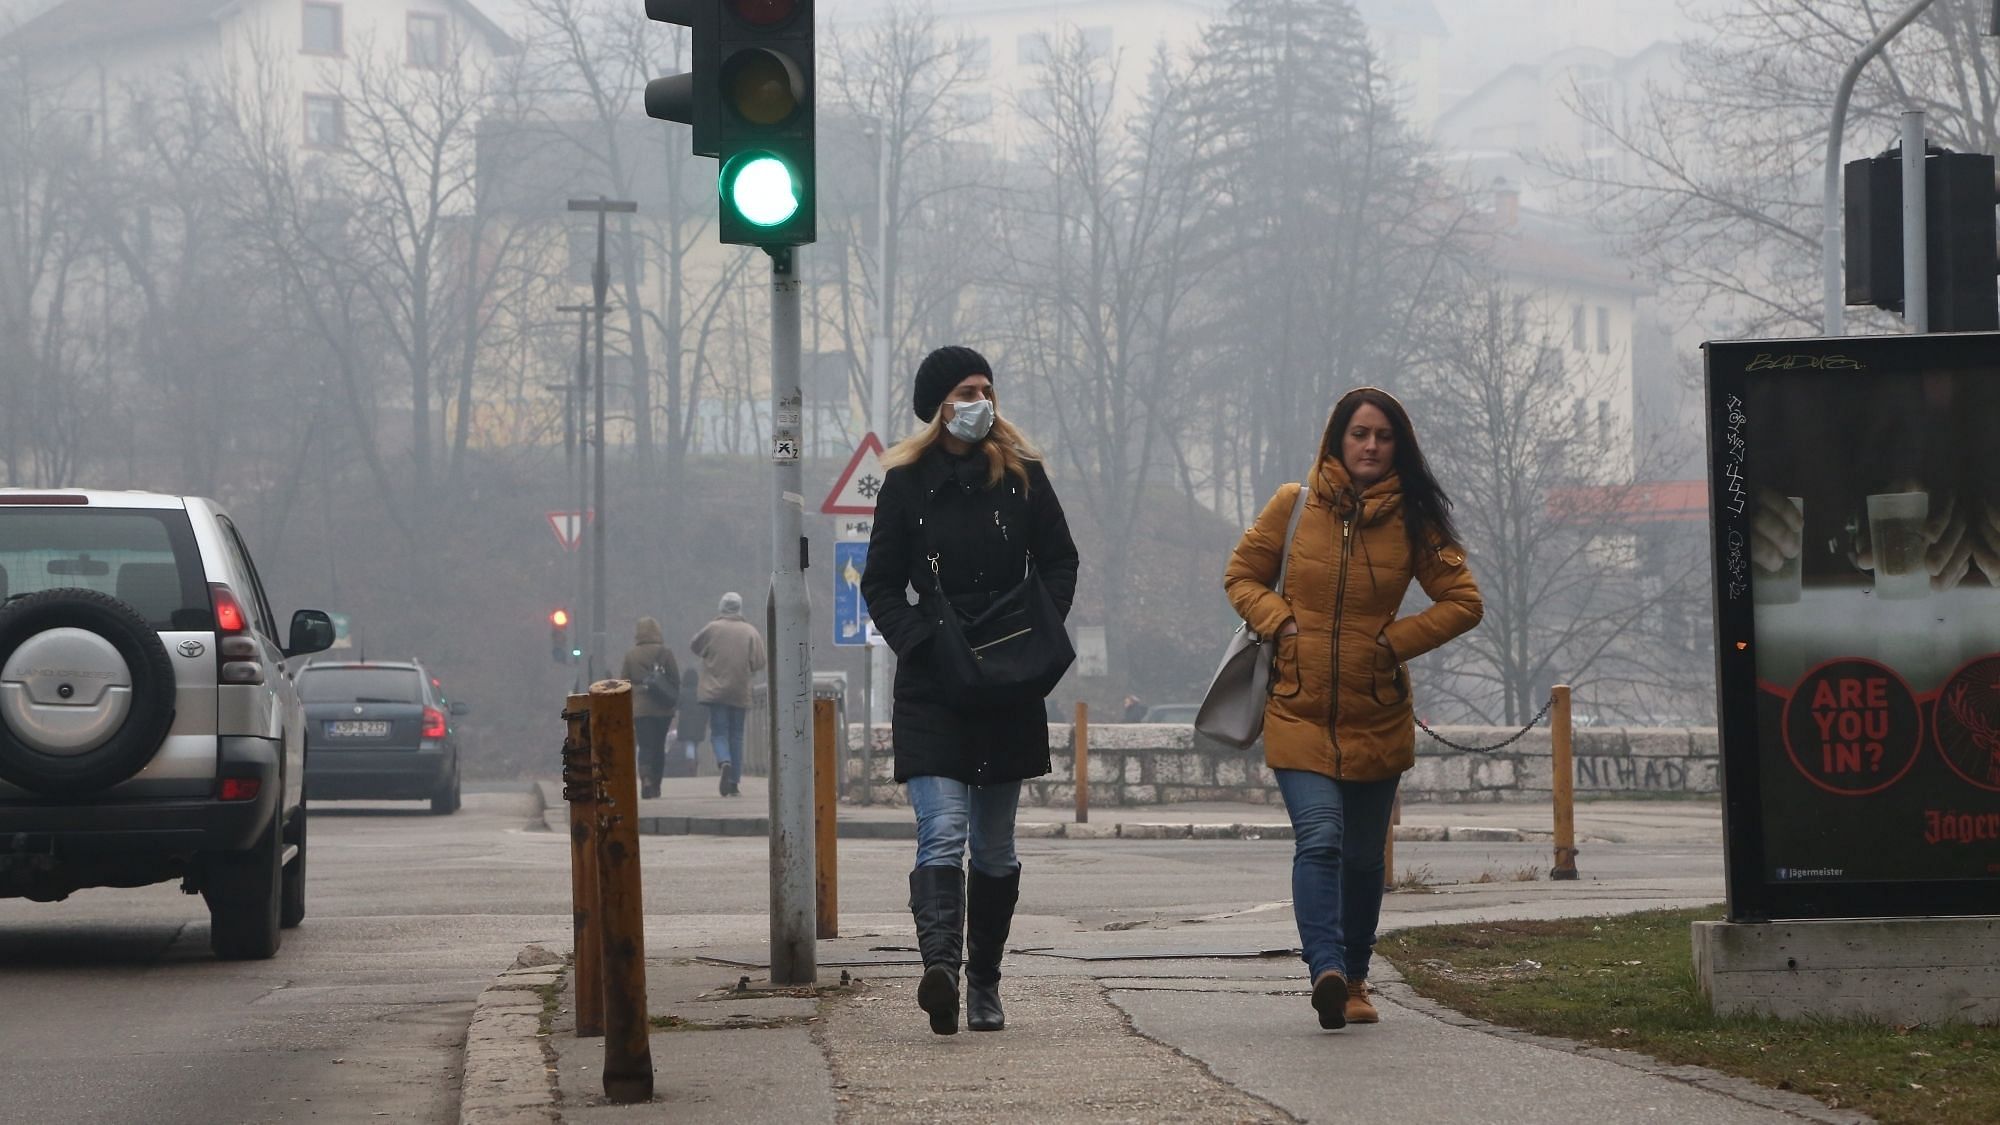 Air Pollution: People walk on the streets of Sarajevo - the capital of Bosnia and Herzegovina wearing masks so as to avoid breathing polluted air.